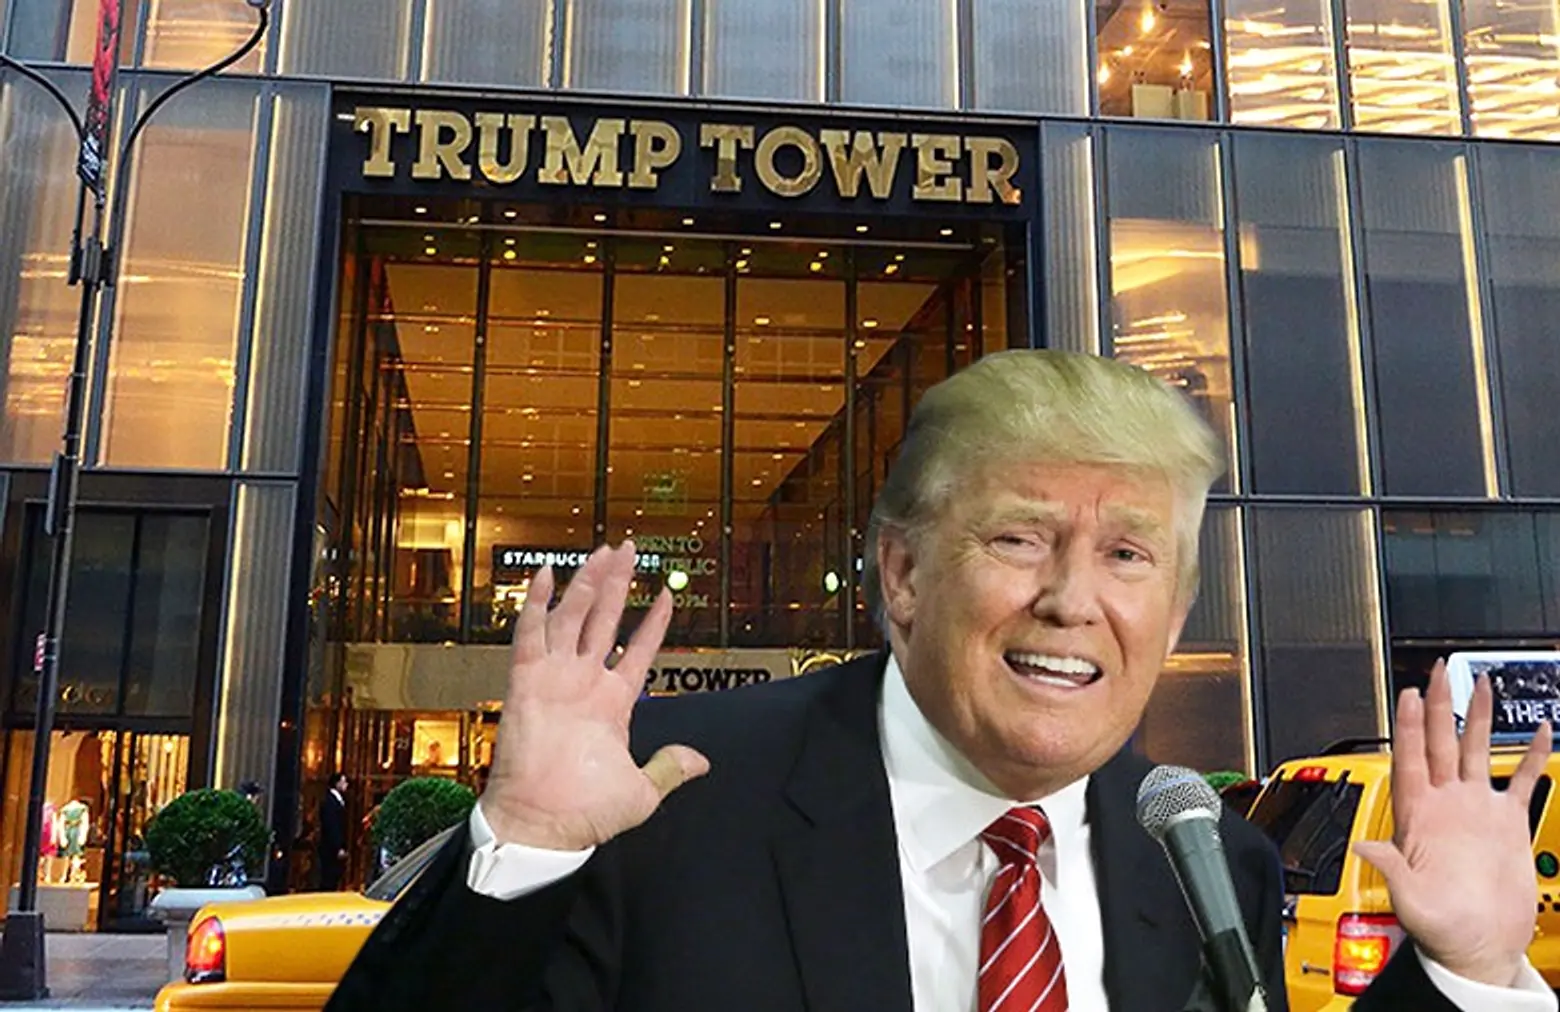 NYPD says it needs 200 cops and $500,000 a day to secure Trump Tower